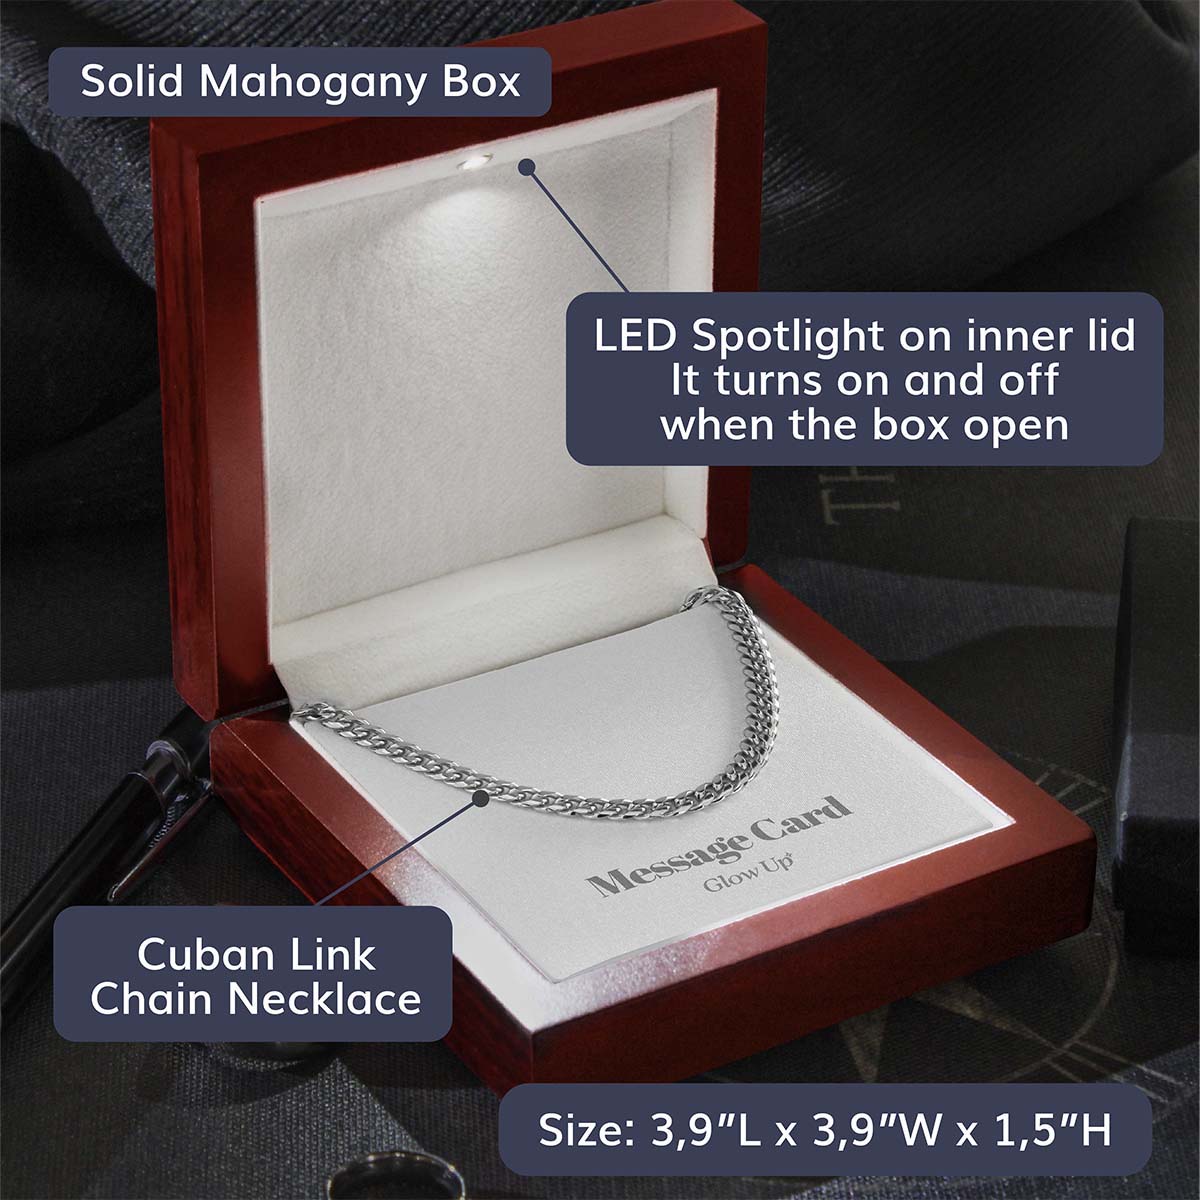 Glow Up Cuban Link Chain 316L Stainless Steel / Luxury LED Box Cuban Link Chain - 5mm